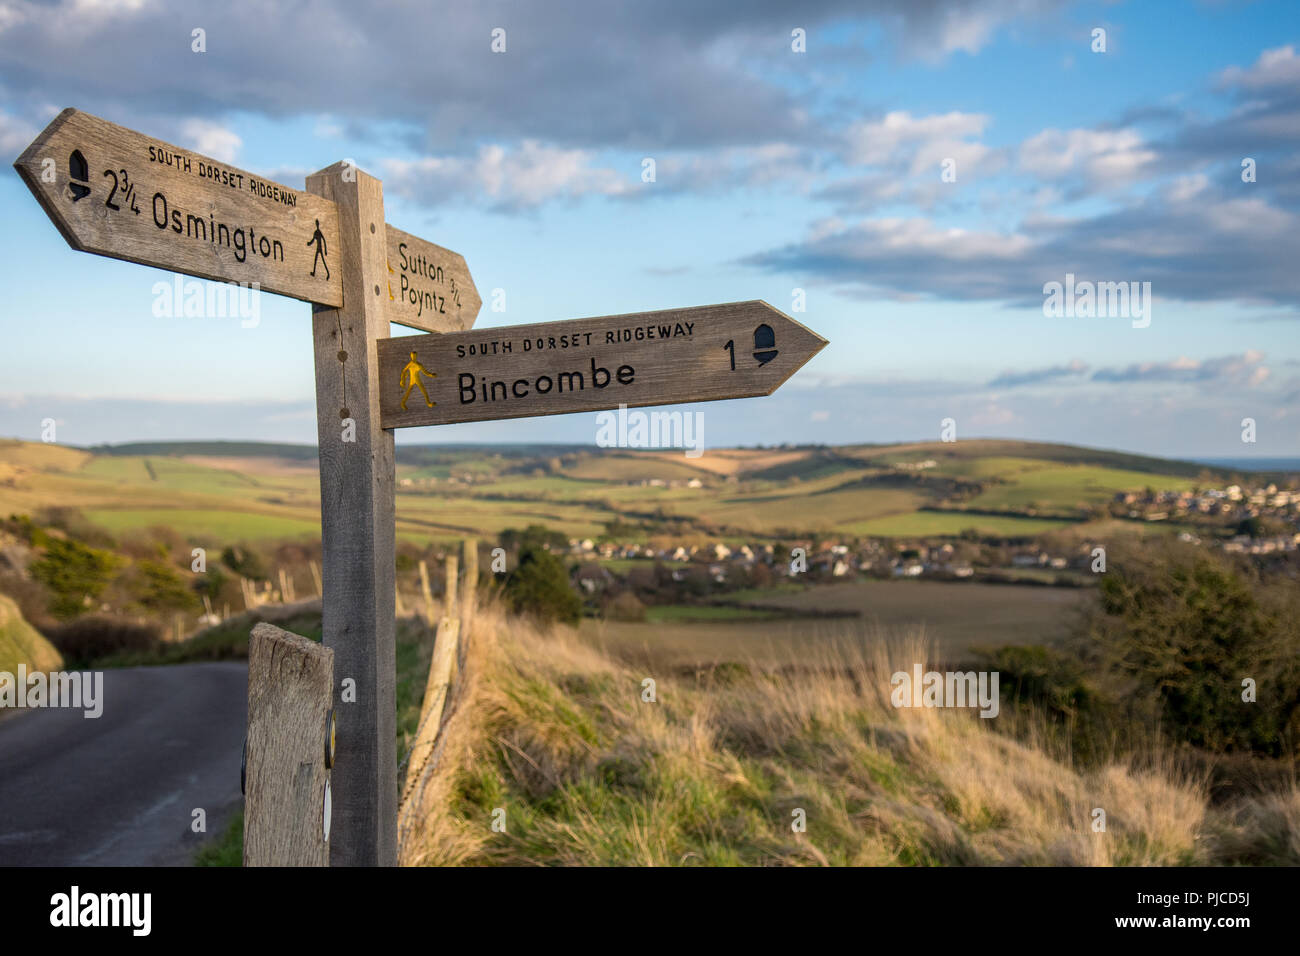 Weymouth, England, UK - March 6, 2016: A signpost indicates routes of footpaths including the South Dorset Ridgeway in the rolling landscape of the Do Stock Photo